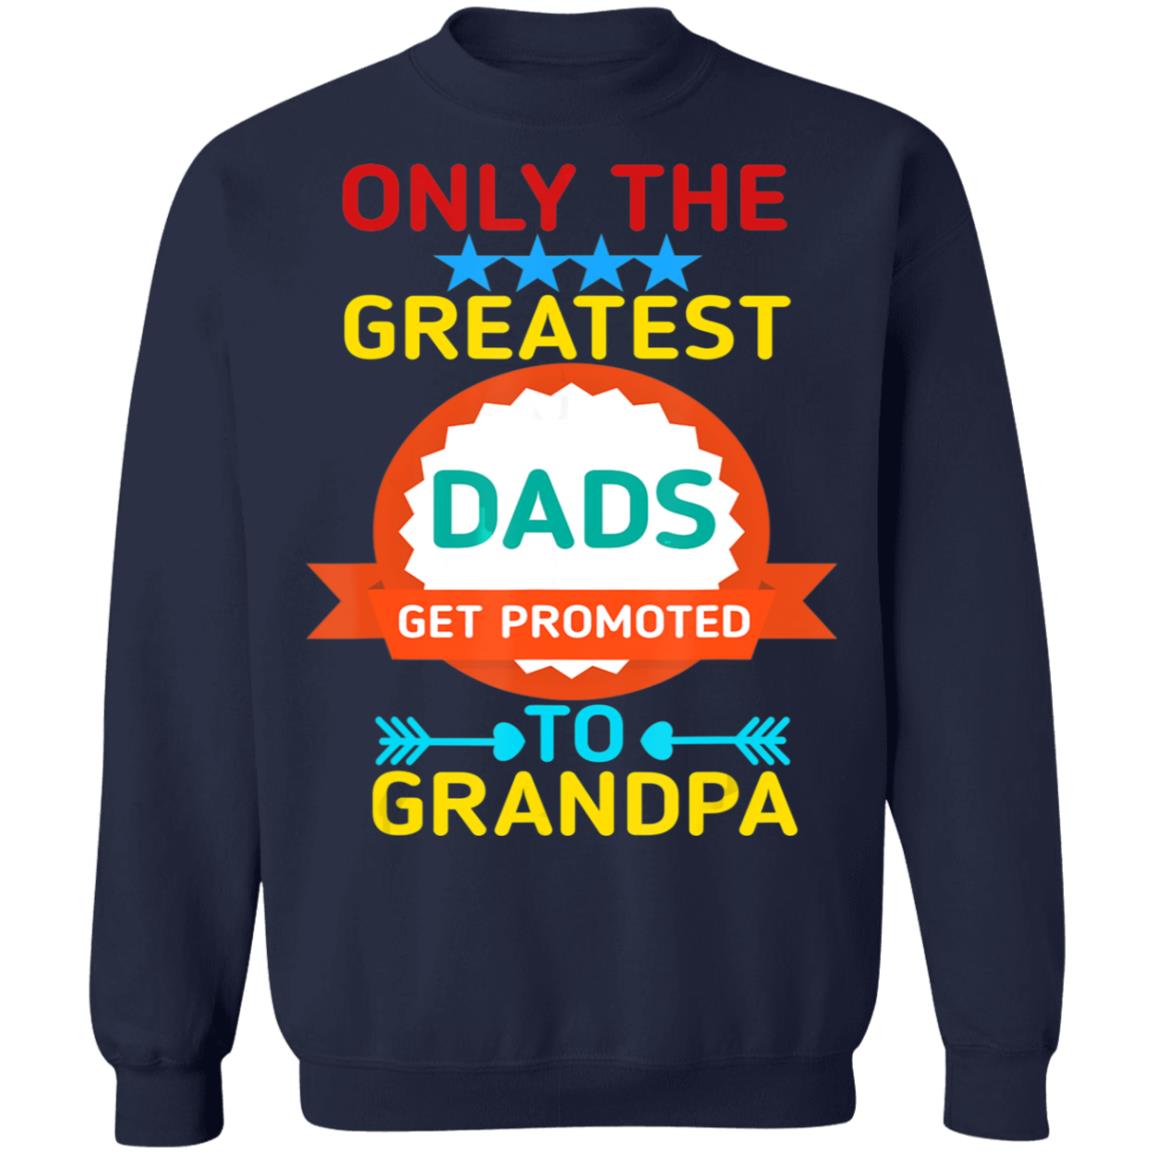 Only The Greatest Dads Get Promoted To Grandpa Shirt